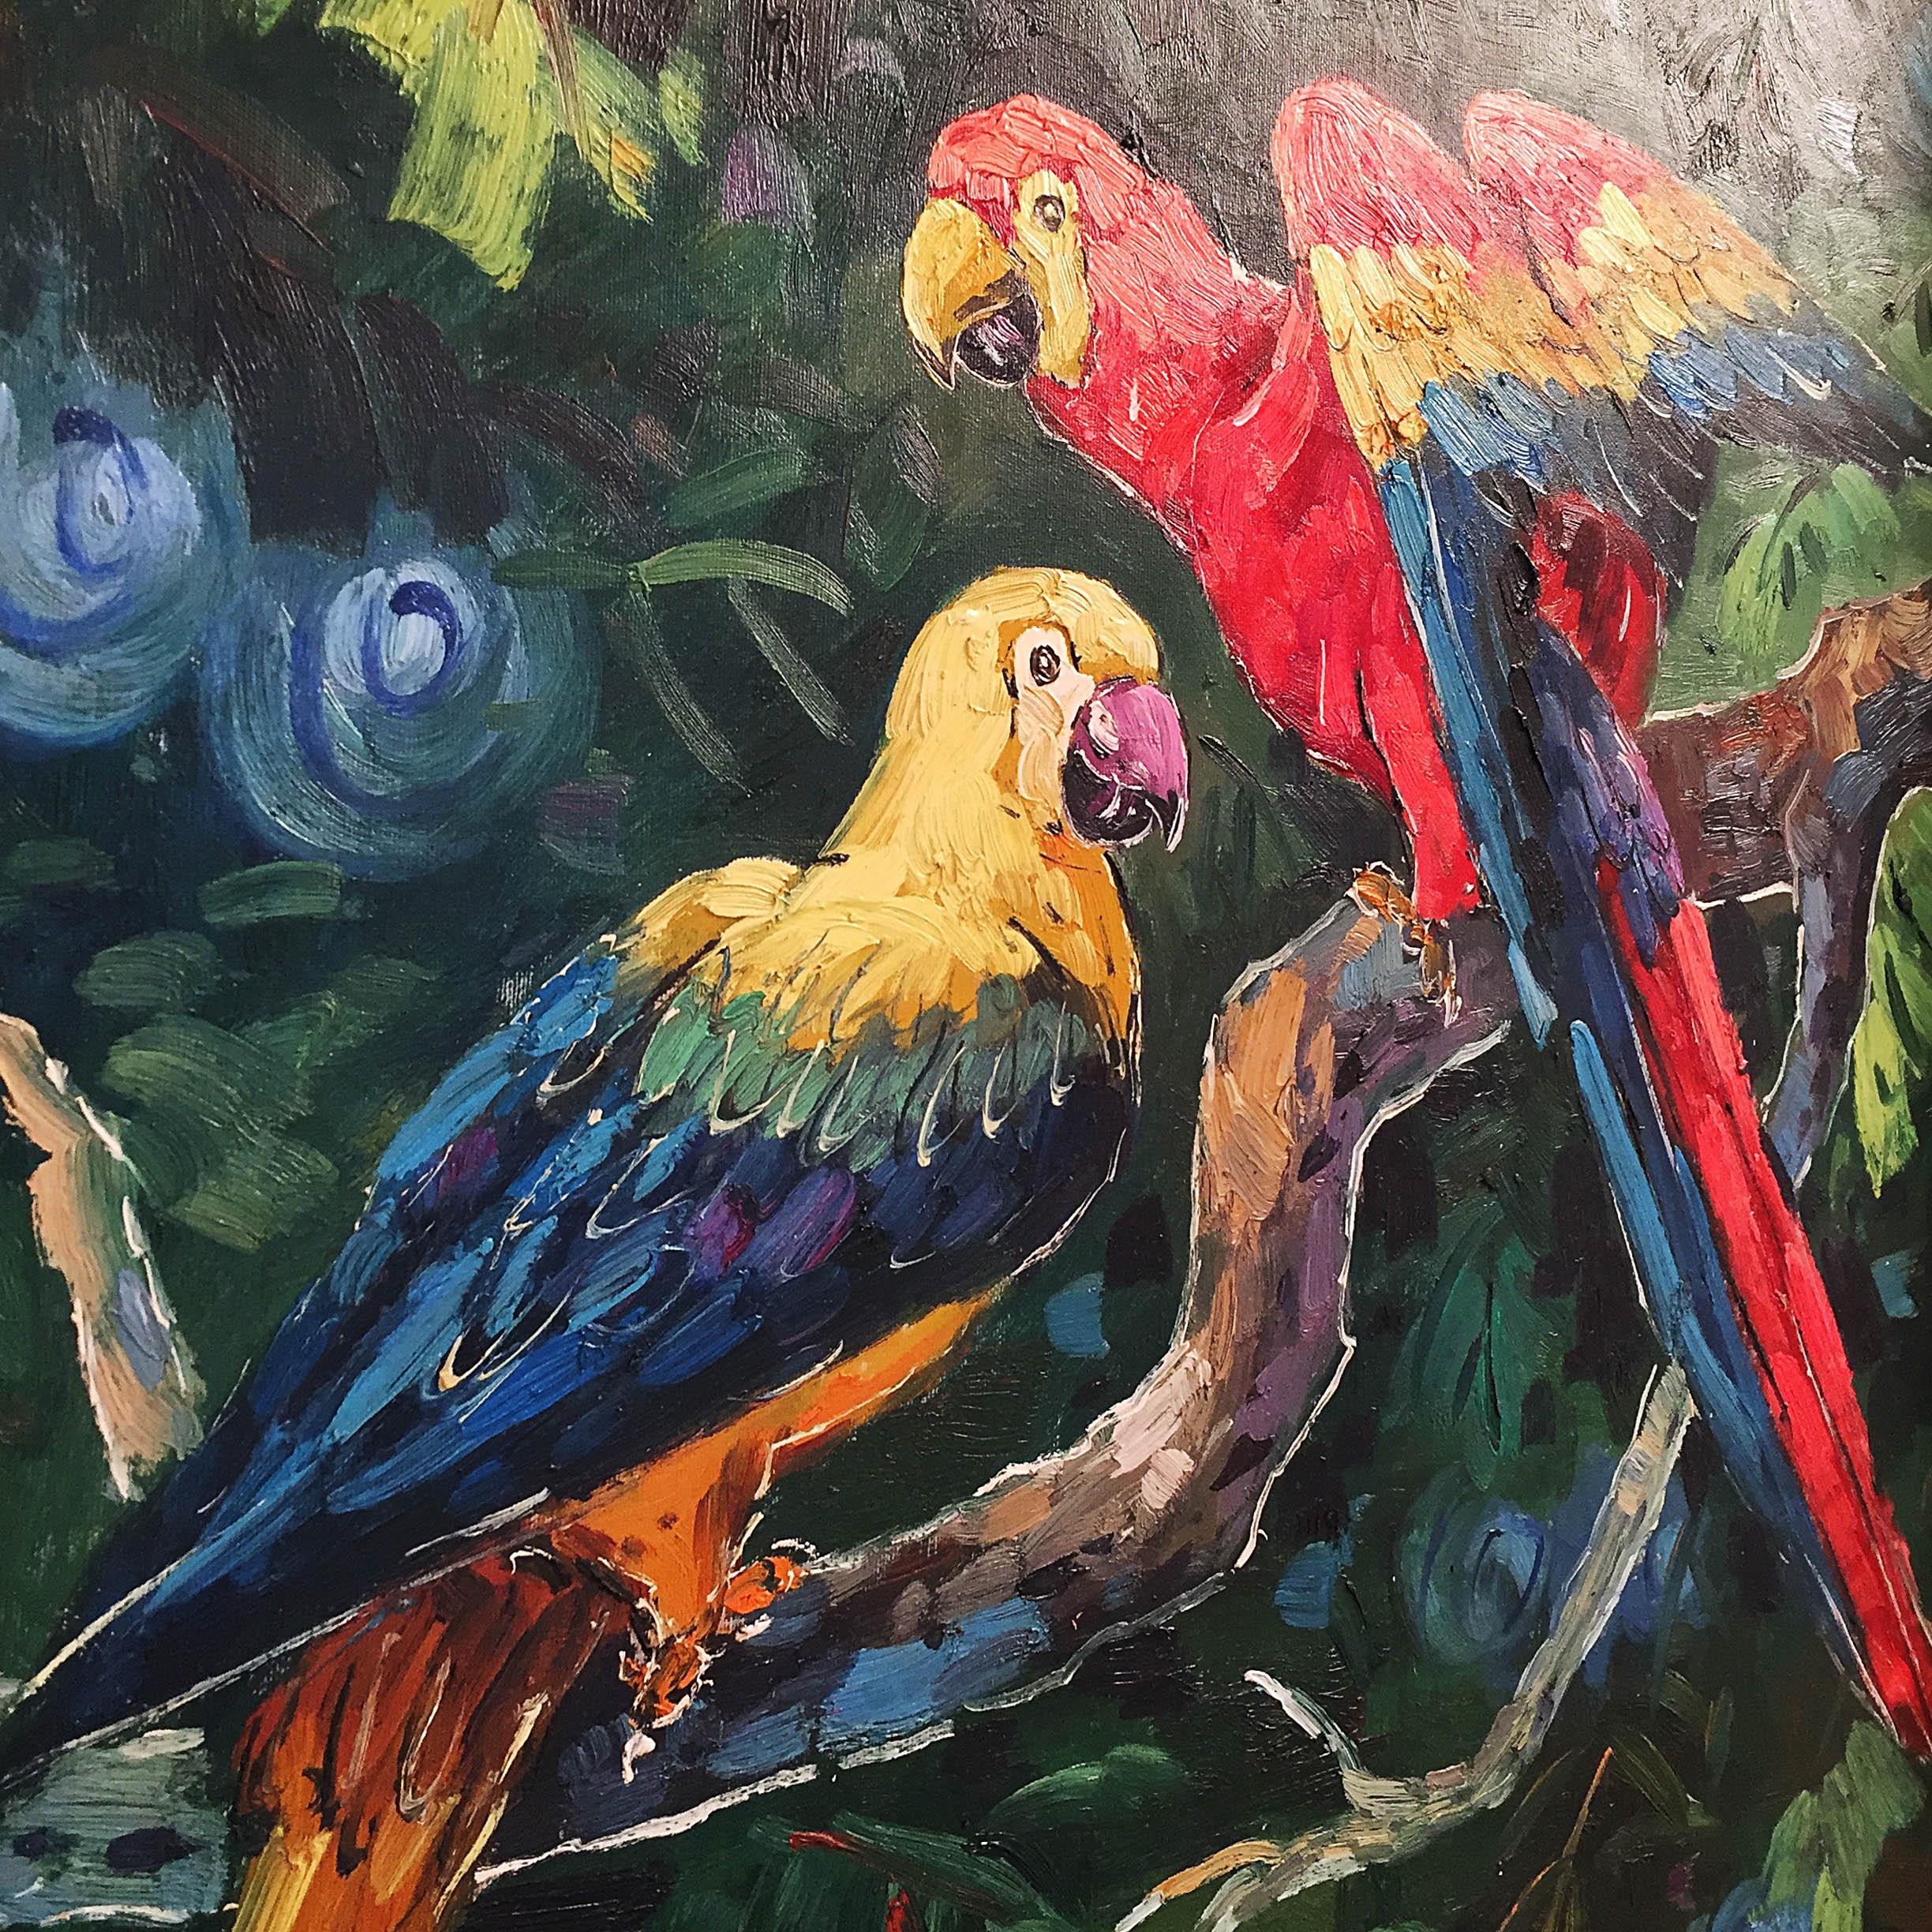 British Exotic Pair of Parrots Painting 1990s Oil on Canvas Gold Frame For Sale